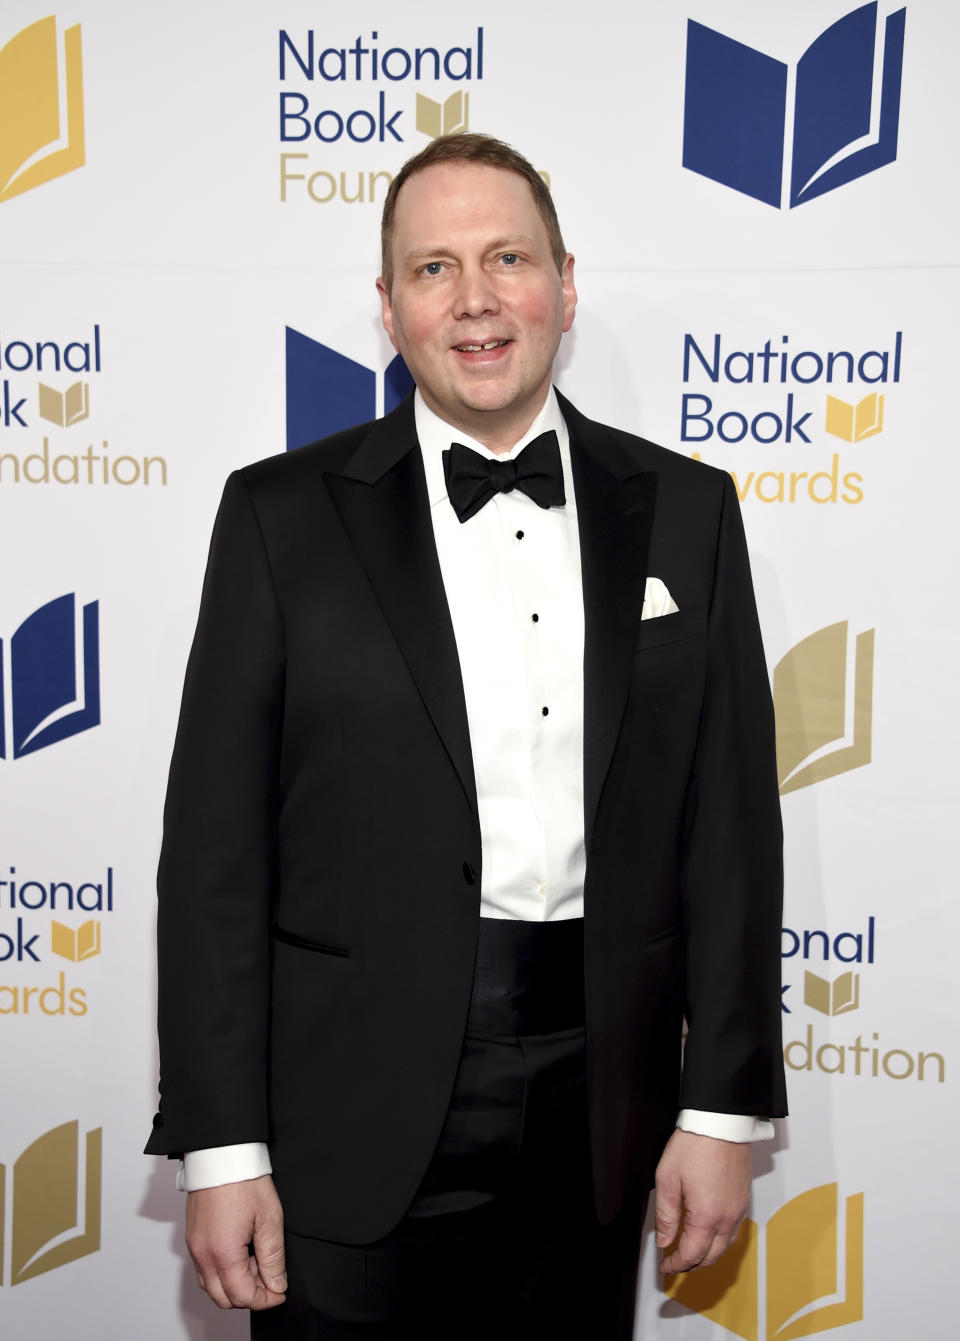 FILE - Author Dav Pilkey attends the 68th National Book Awards Ceremony and Benefit Dinner in New York on Nov. 15, 2017. A graphic novel for children from the wildly popular “Captain Underpants” series, “The Adventures of Ook and Glu," is being pulled from library and book store shelves after its publisher said it “perpetuates passive racism.” (Photo by Evan Agostini/Invision/AP, File)